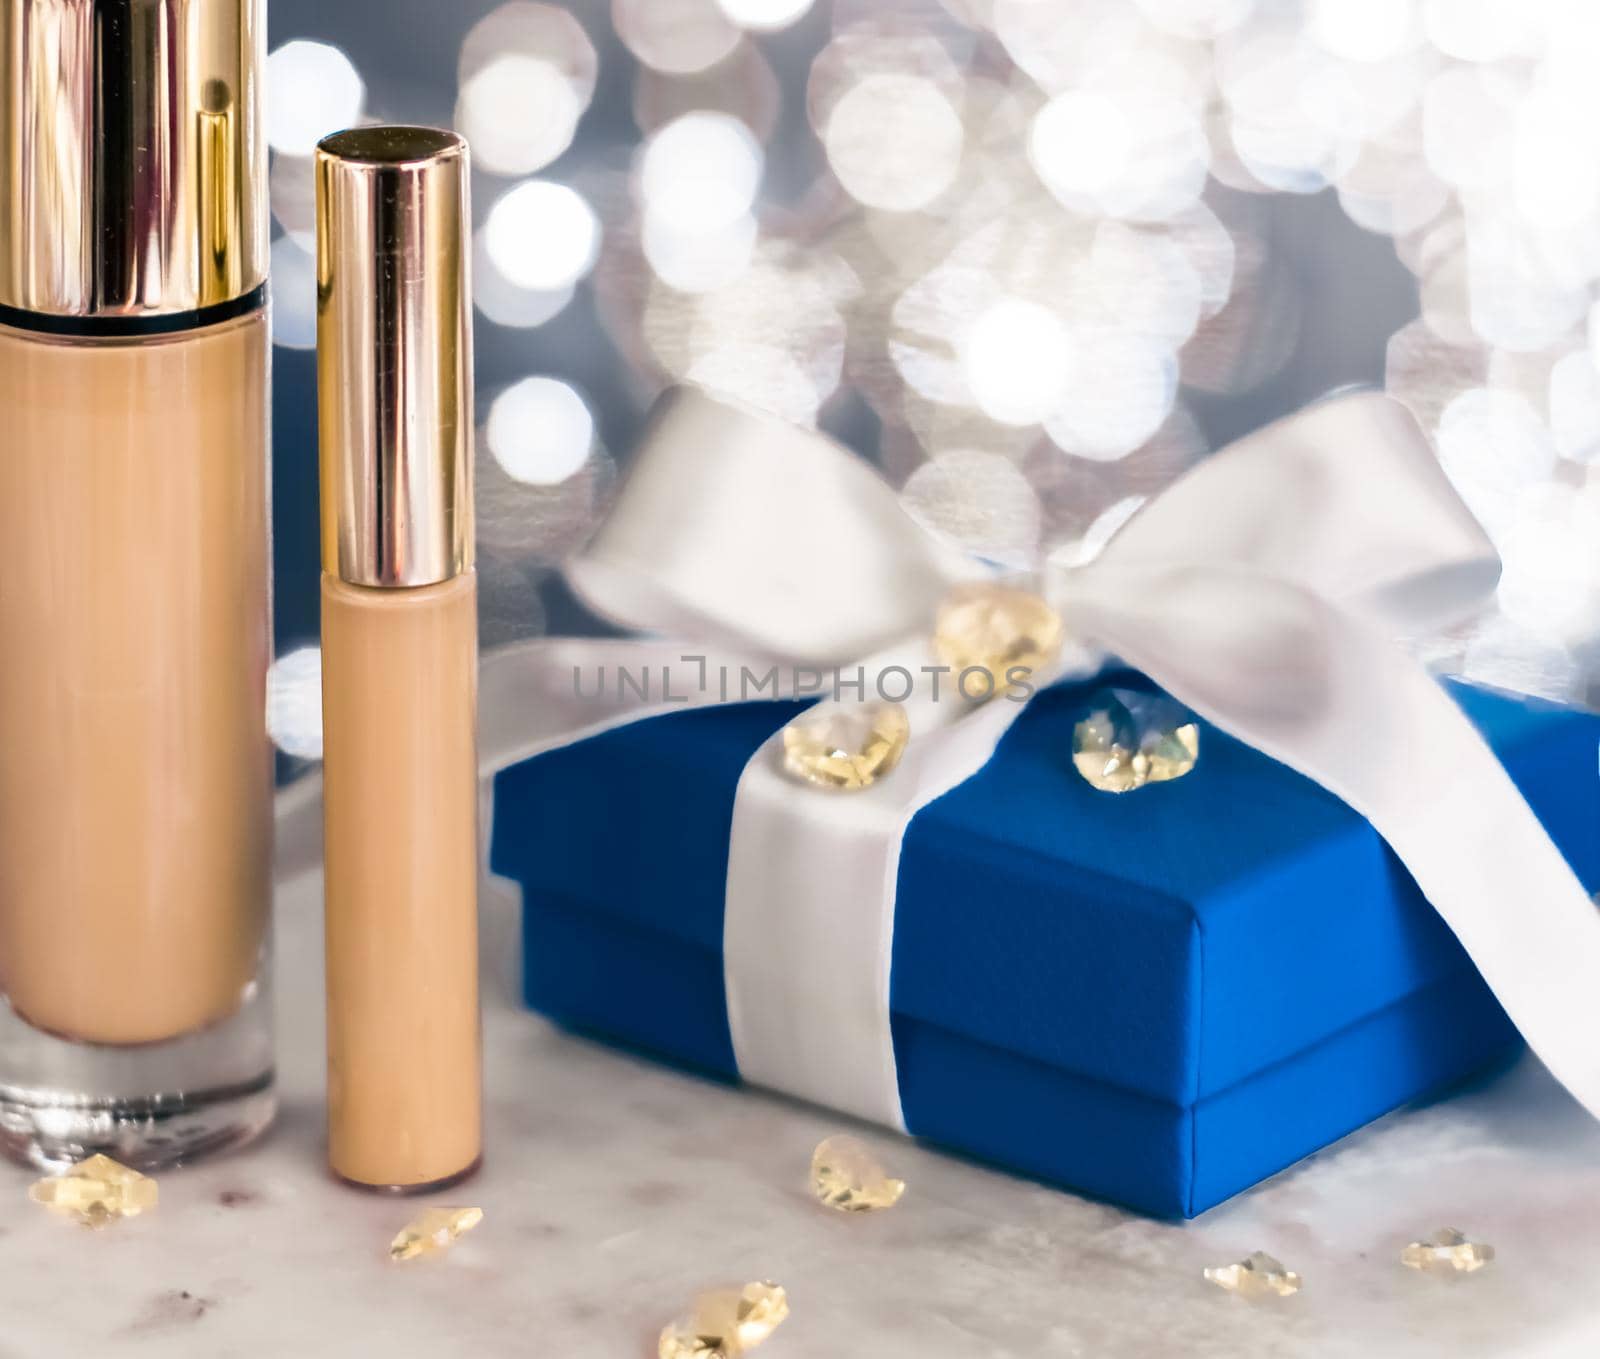 Holiday make-up foundation base, concealer and blue gift box, luxury cosmetics present and blank label products for beauty brand design by Anneleven